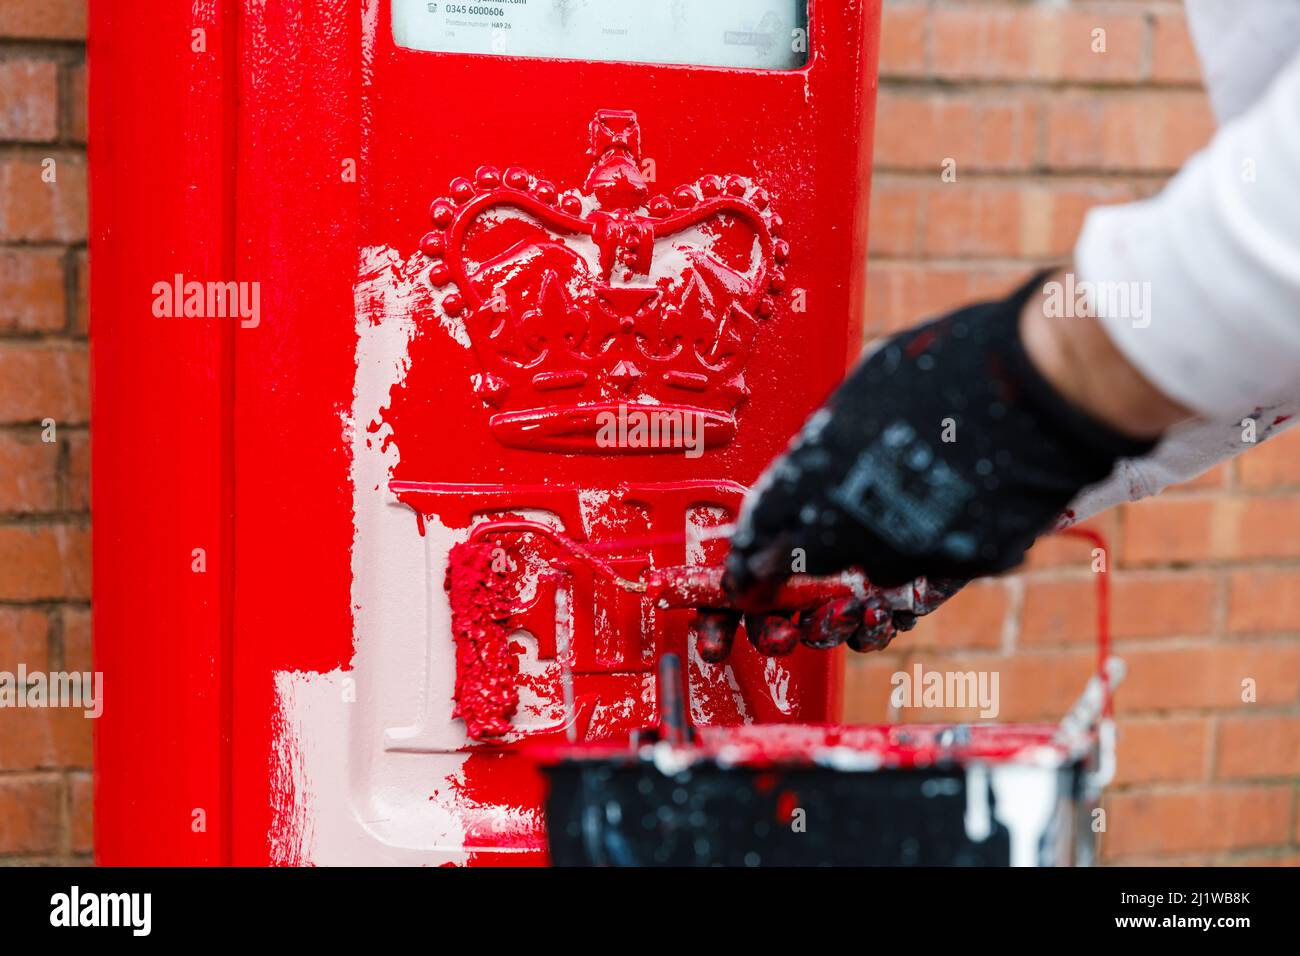 Wembley Park, UK. 28th March 2022.Royal Mails iconic red and black letterboxes get repaintd as part of their scheduled maintenance, approx. every 3 to 5 years. Having first applied a pink primer, within a few days, they are painted their traditional red and black colouring. Painter, Besim, has been repainting post boxes for 25 years. Amanda Rose/Alamy Live News Stock Photo